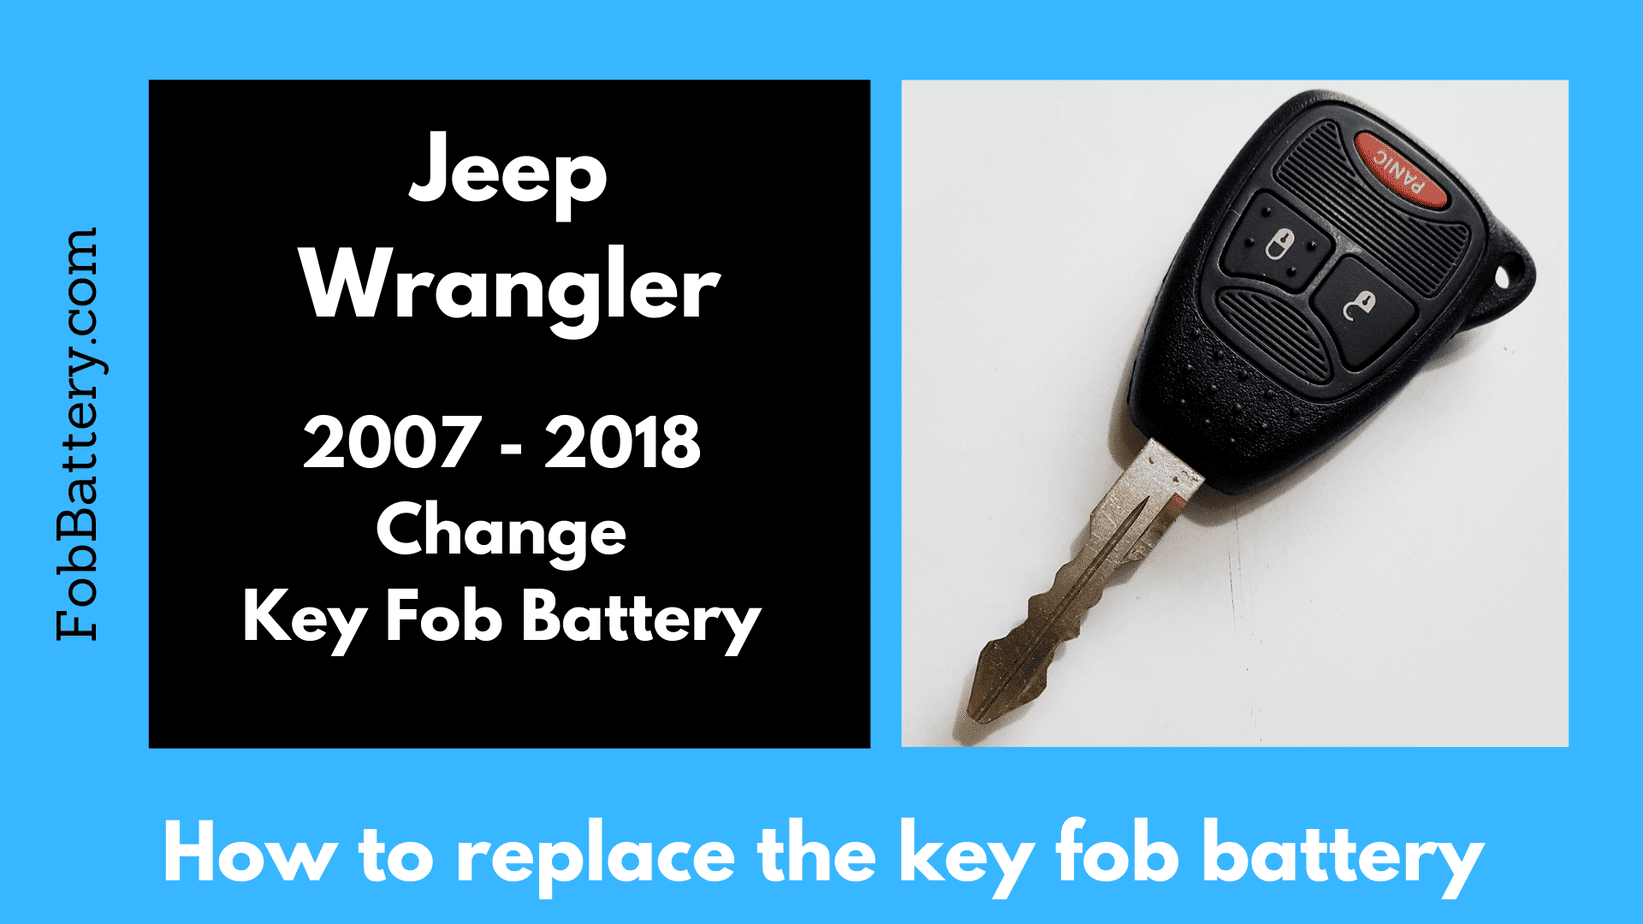 How to replace Jeep Wrangler key fob battery